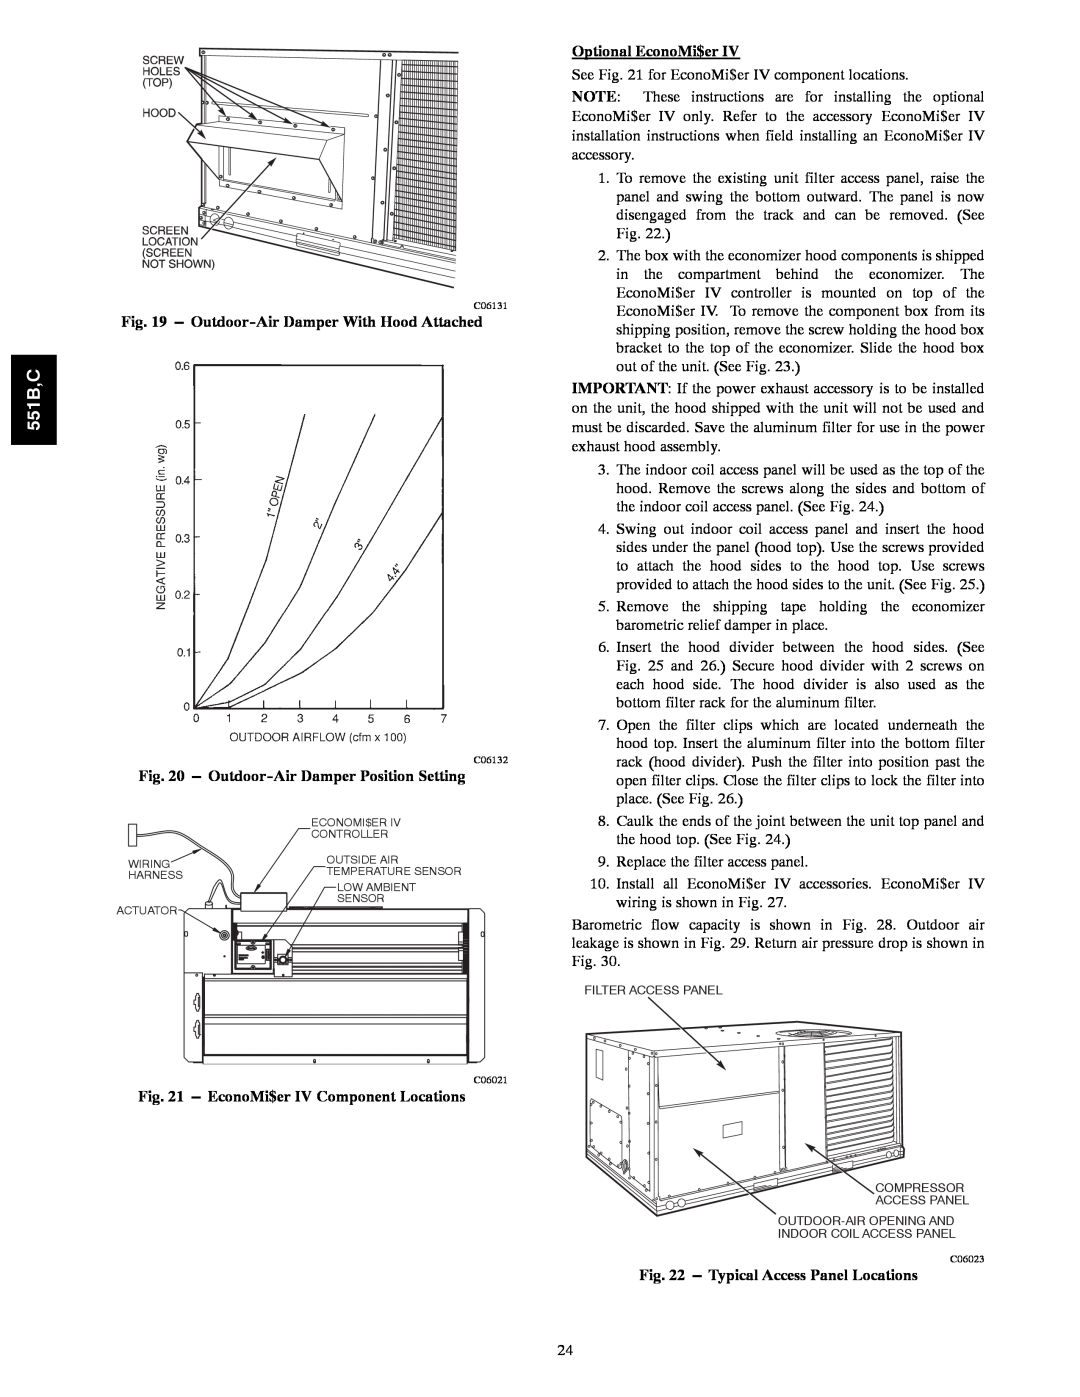 Bryant 551B,C, Fig. Fig, Outdoor-AirDamper With Hood Attached, Outdoor-AirDamper Position Setting, Optional EconoMi$er 